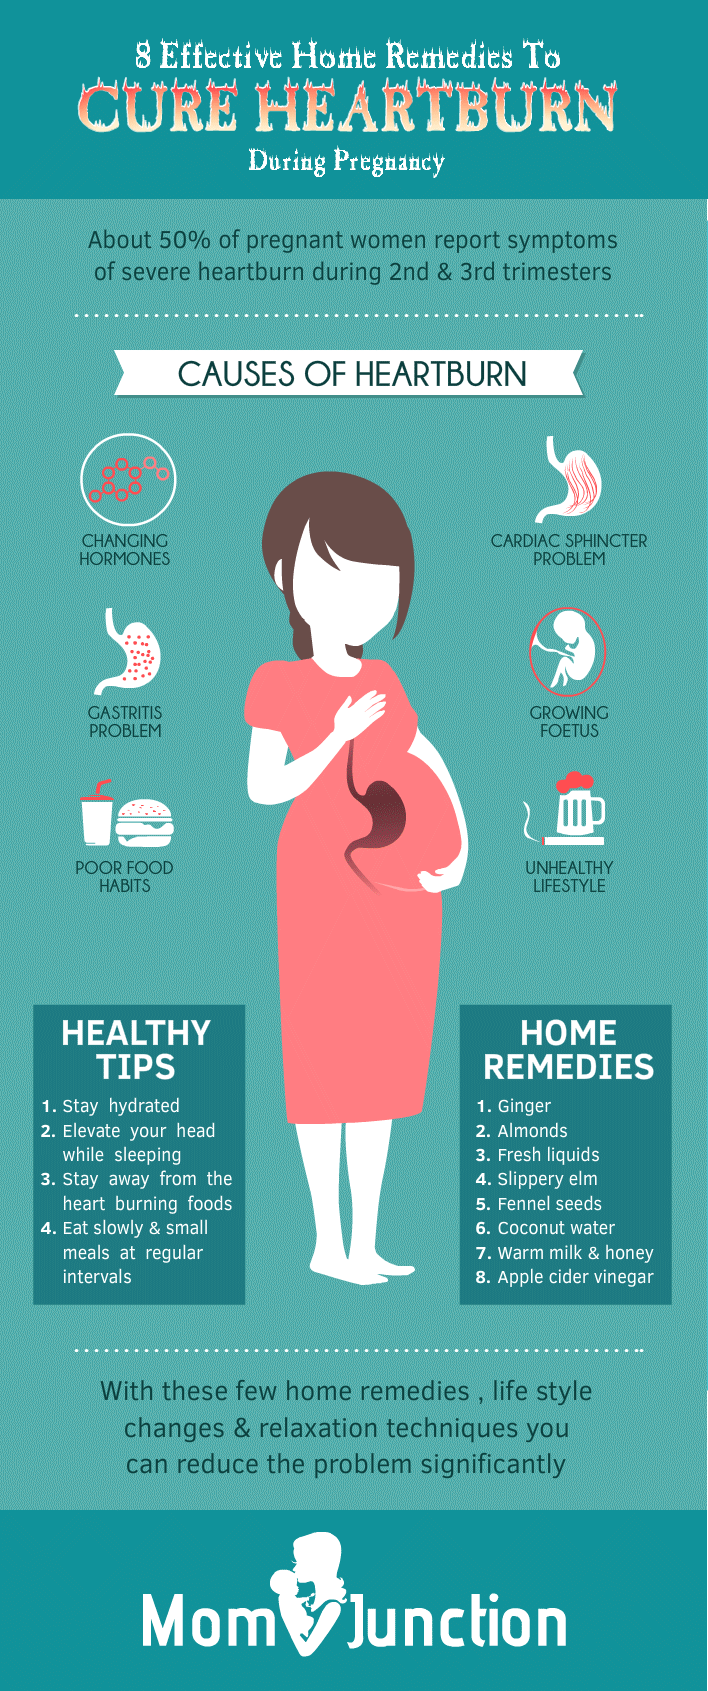 Effective Home Remedies For Heartburn During Pregnancy